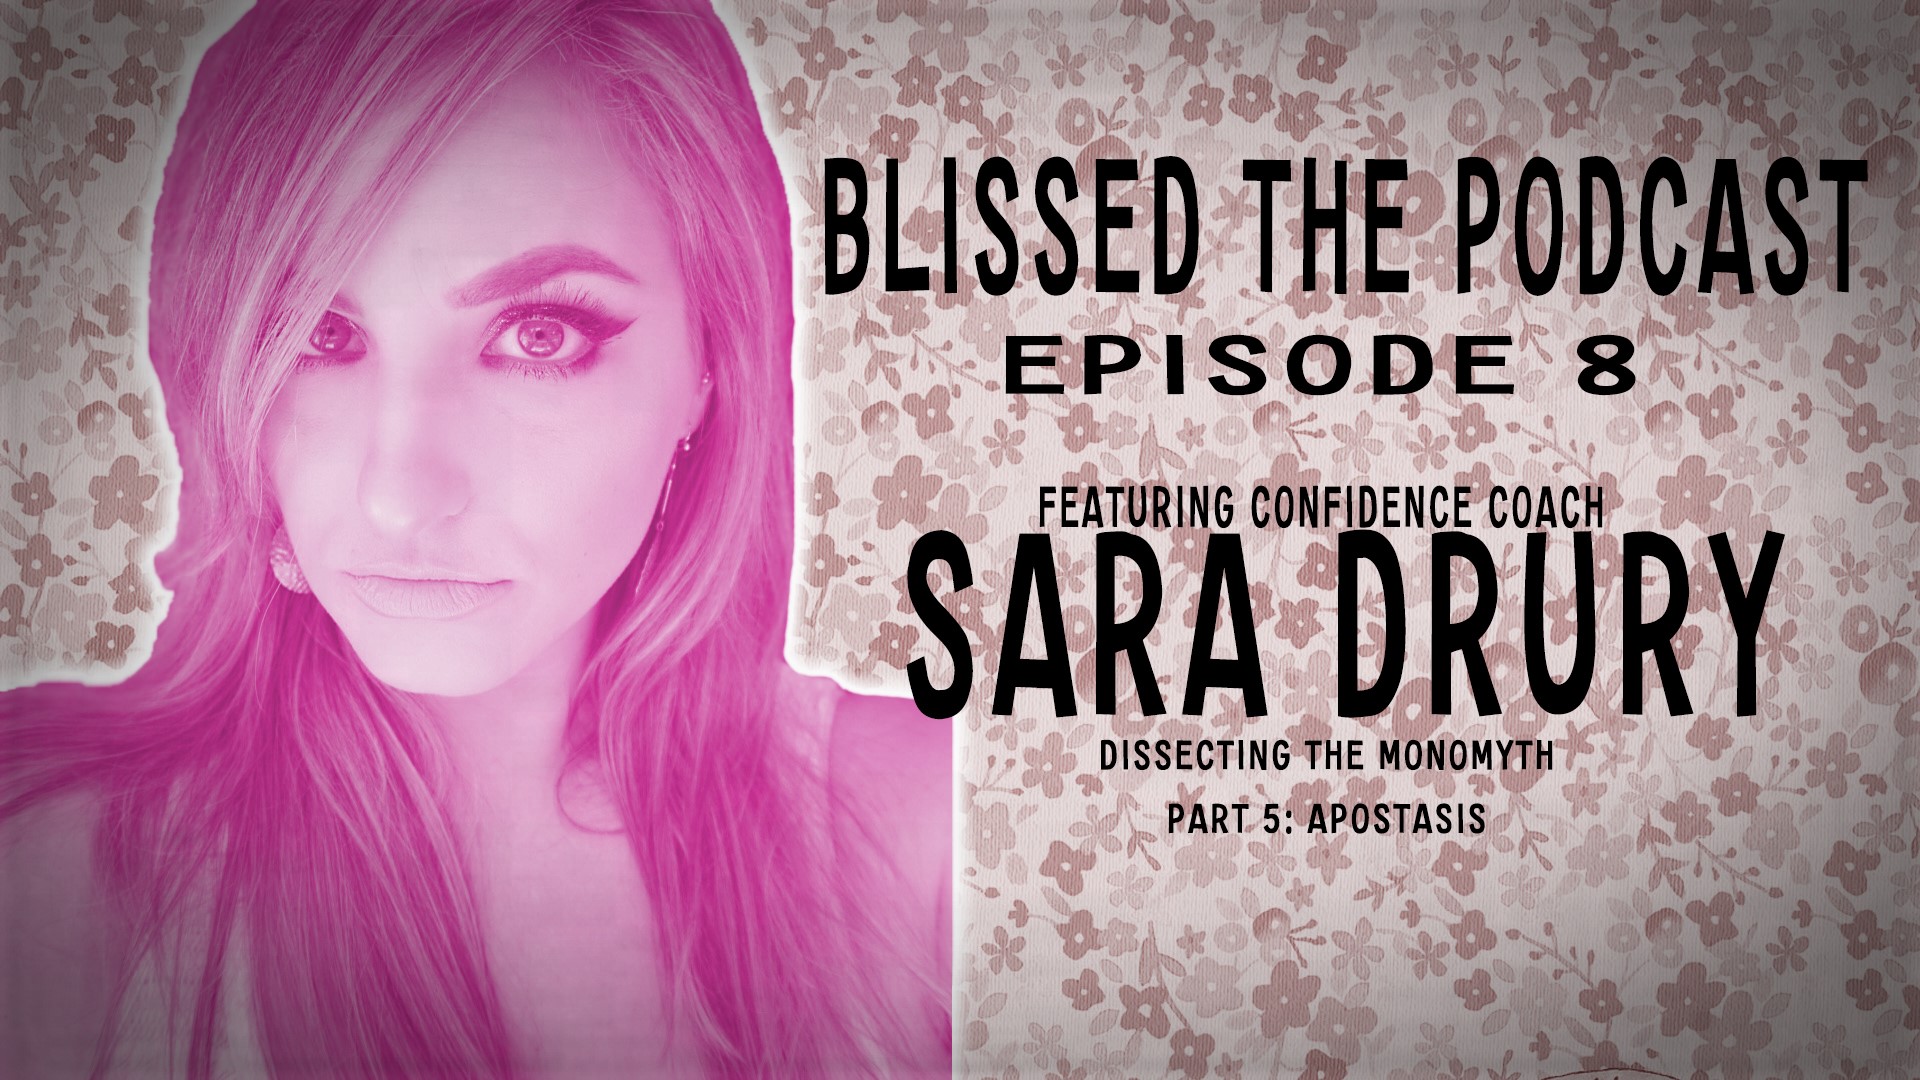 Blissed: The Podcast - Episode 8 - Sara Drury - Dissecting The Monomyth: Part 5 - Apostasis - How To Find Your Bliss